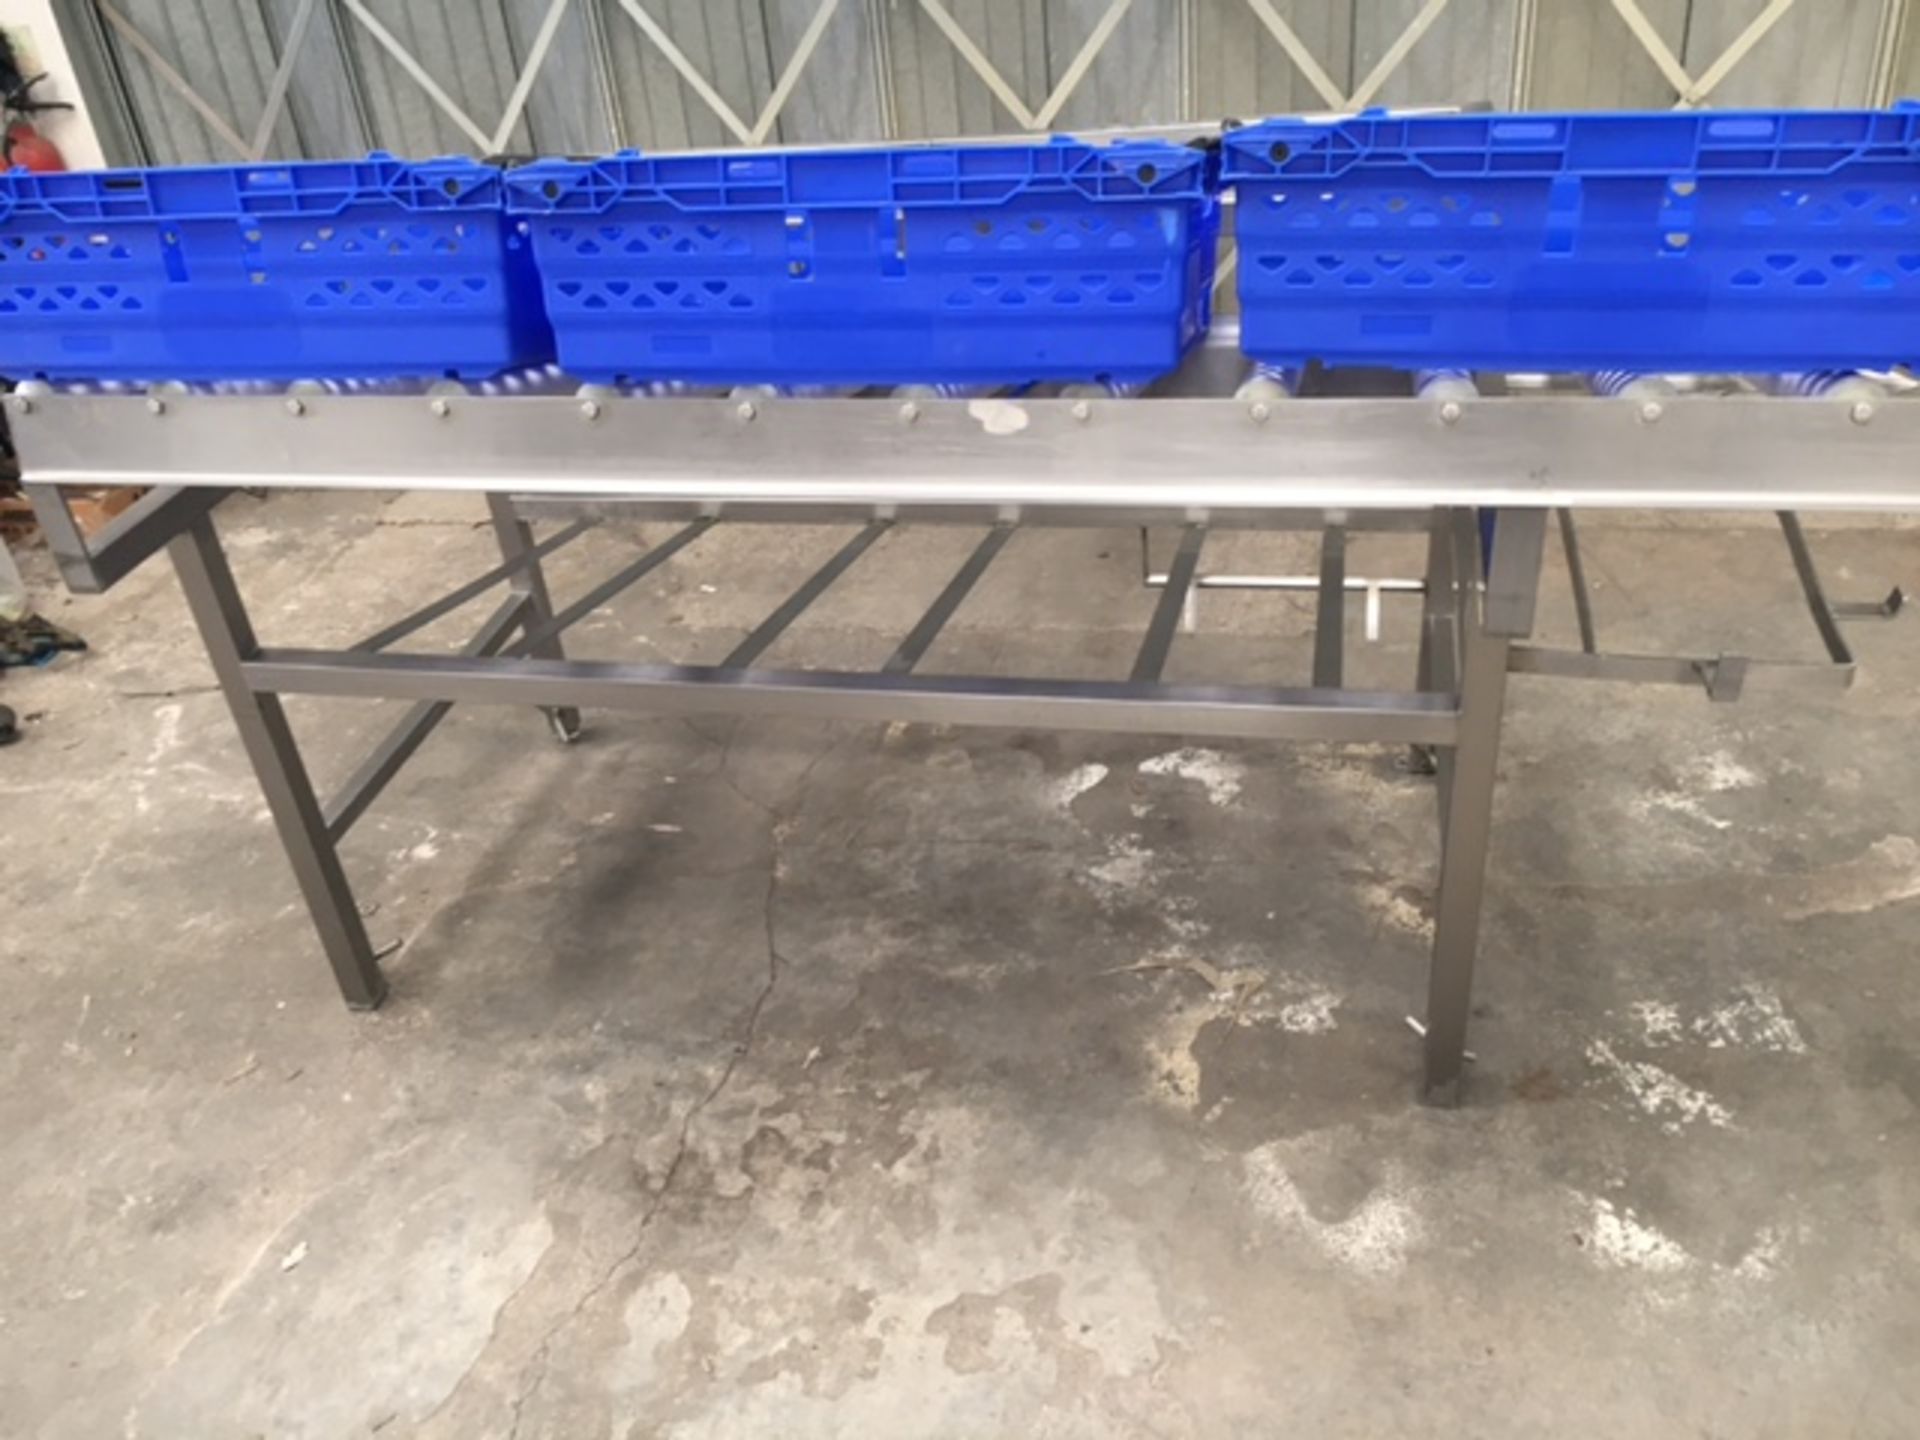 2 x Pick Place tables with roller conveyor Foot print 1mx 1.9m. roller conveyor 300mm x 1.9m - Image 2 of 3